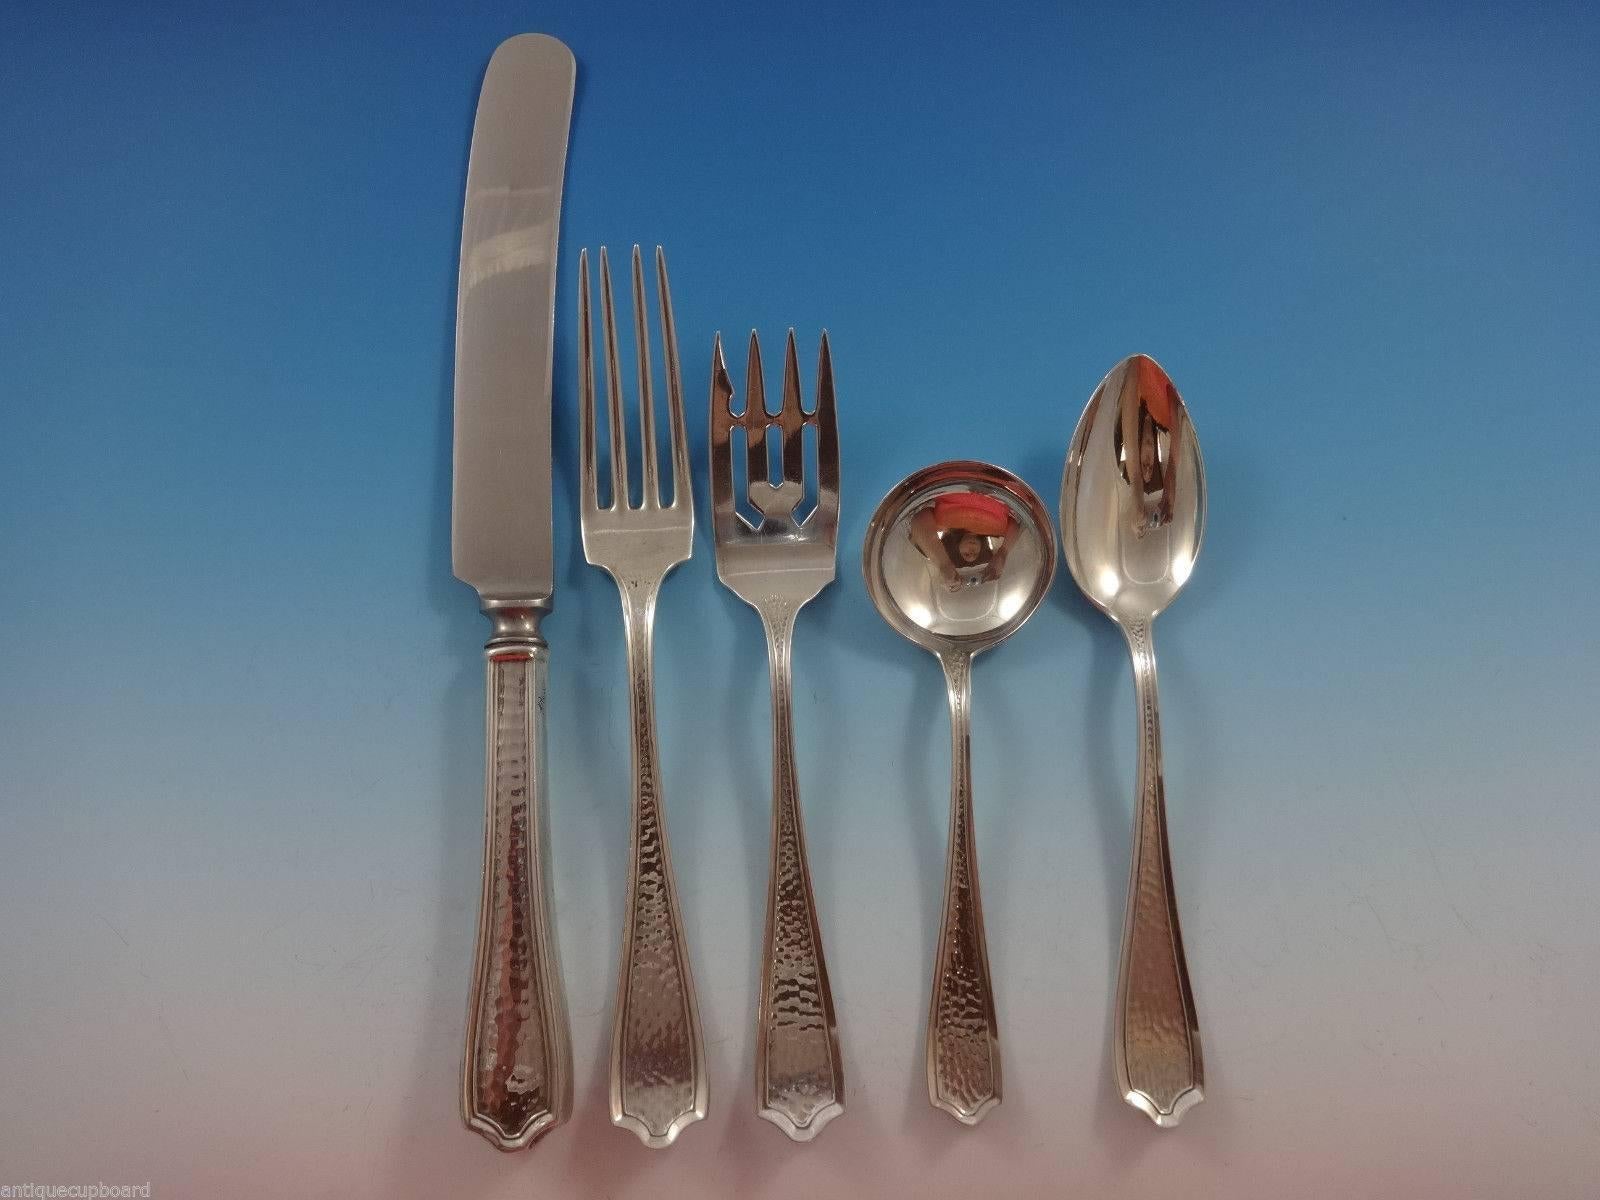 Fabulous Maryland hand-hammered by Alvin sterling silver Flatware set of 47 Pieces. This rare set has a beautiful, subtle hand-hammered finish and includes:

Eight knives, 9